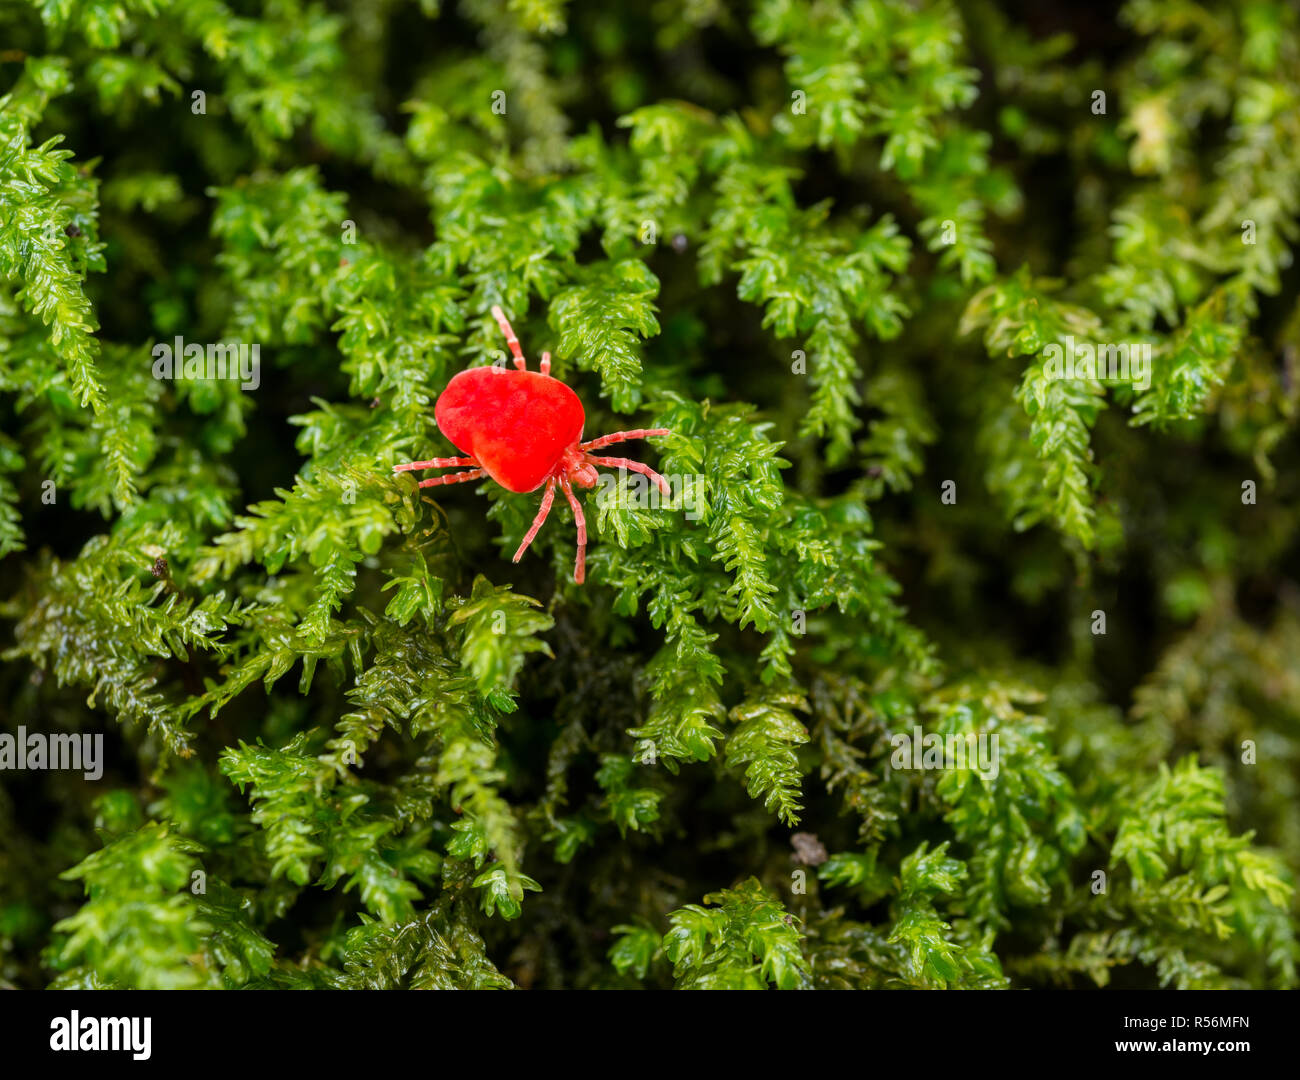 One of the many species of red velvet mite, Family Trombidiidae, likely Genus Trombidium, crawling across a bed of wet moss on a tree trunk in central Stock Photo